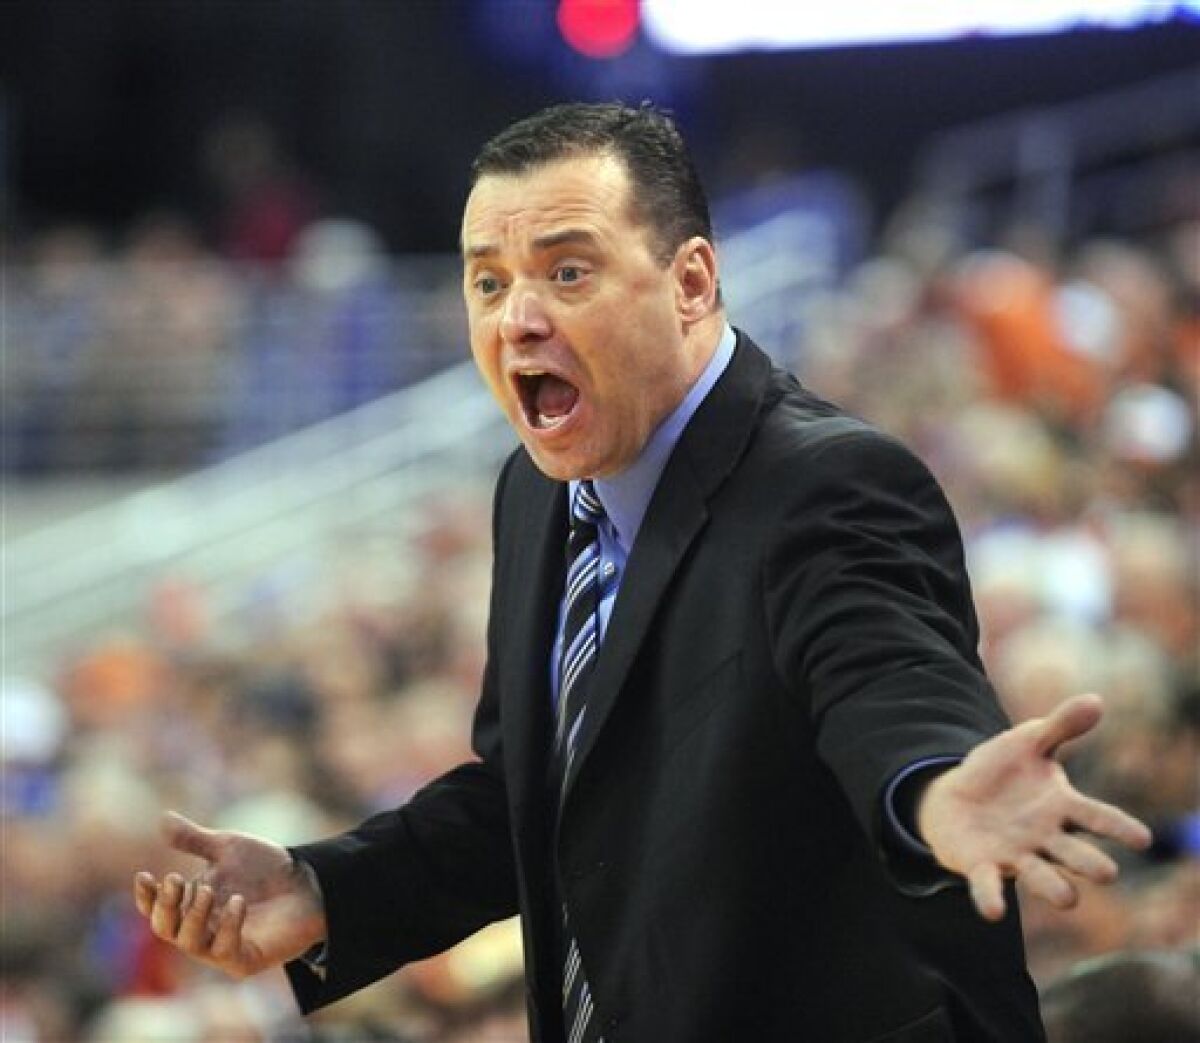 Kentucky fires Gillispie after just 2 years - The San Diego Union-Tribune